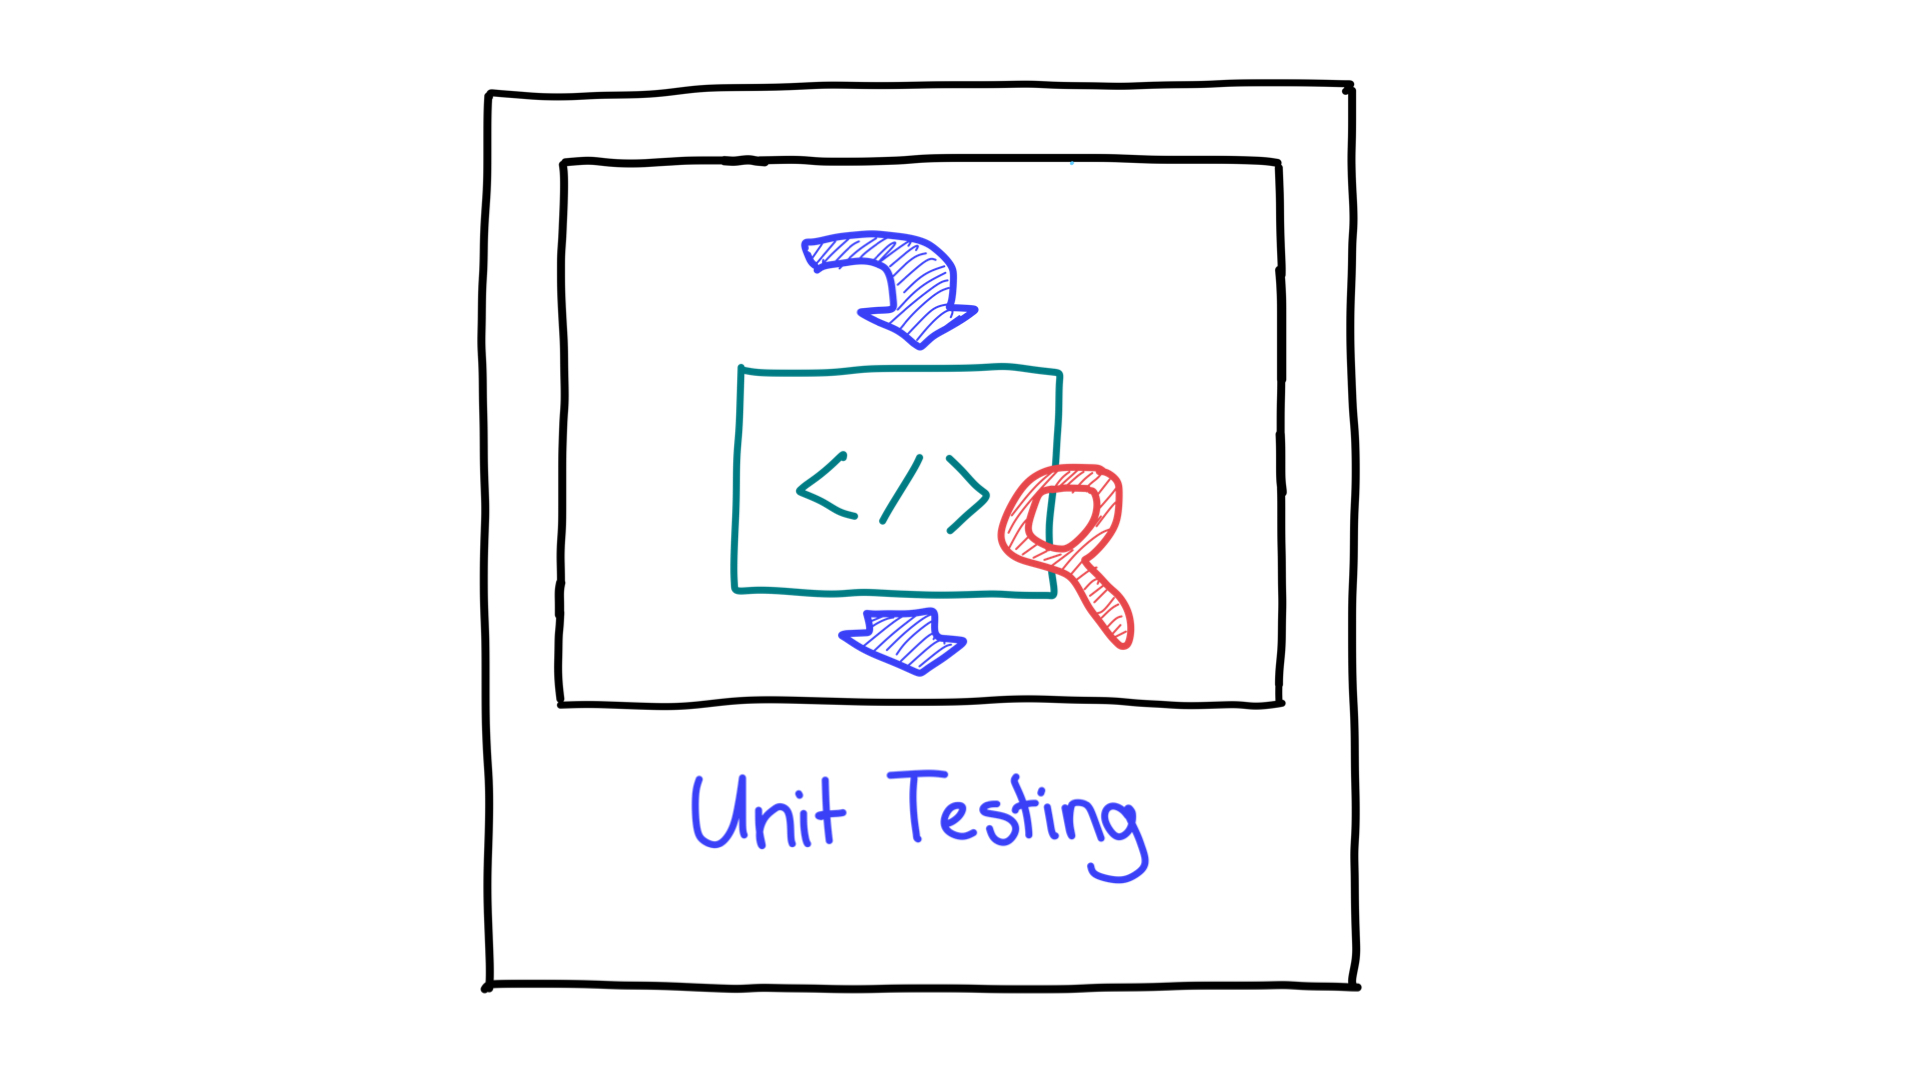 A simplified depiction of unit testing showing input and output.